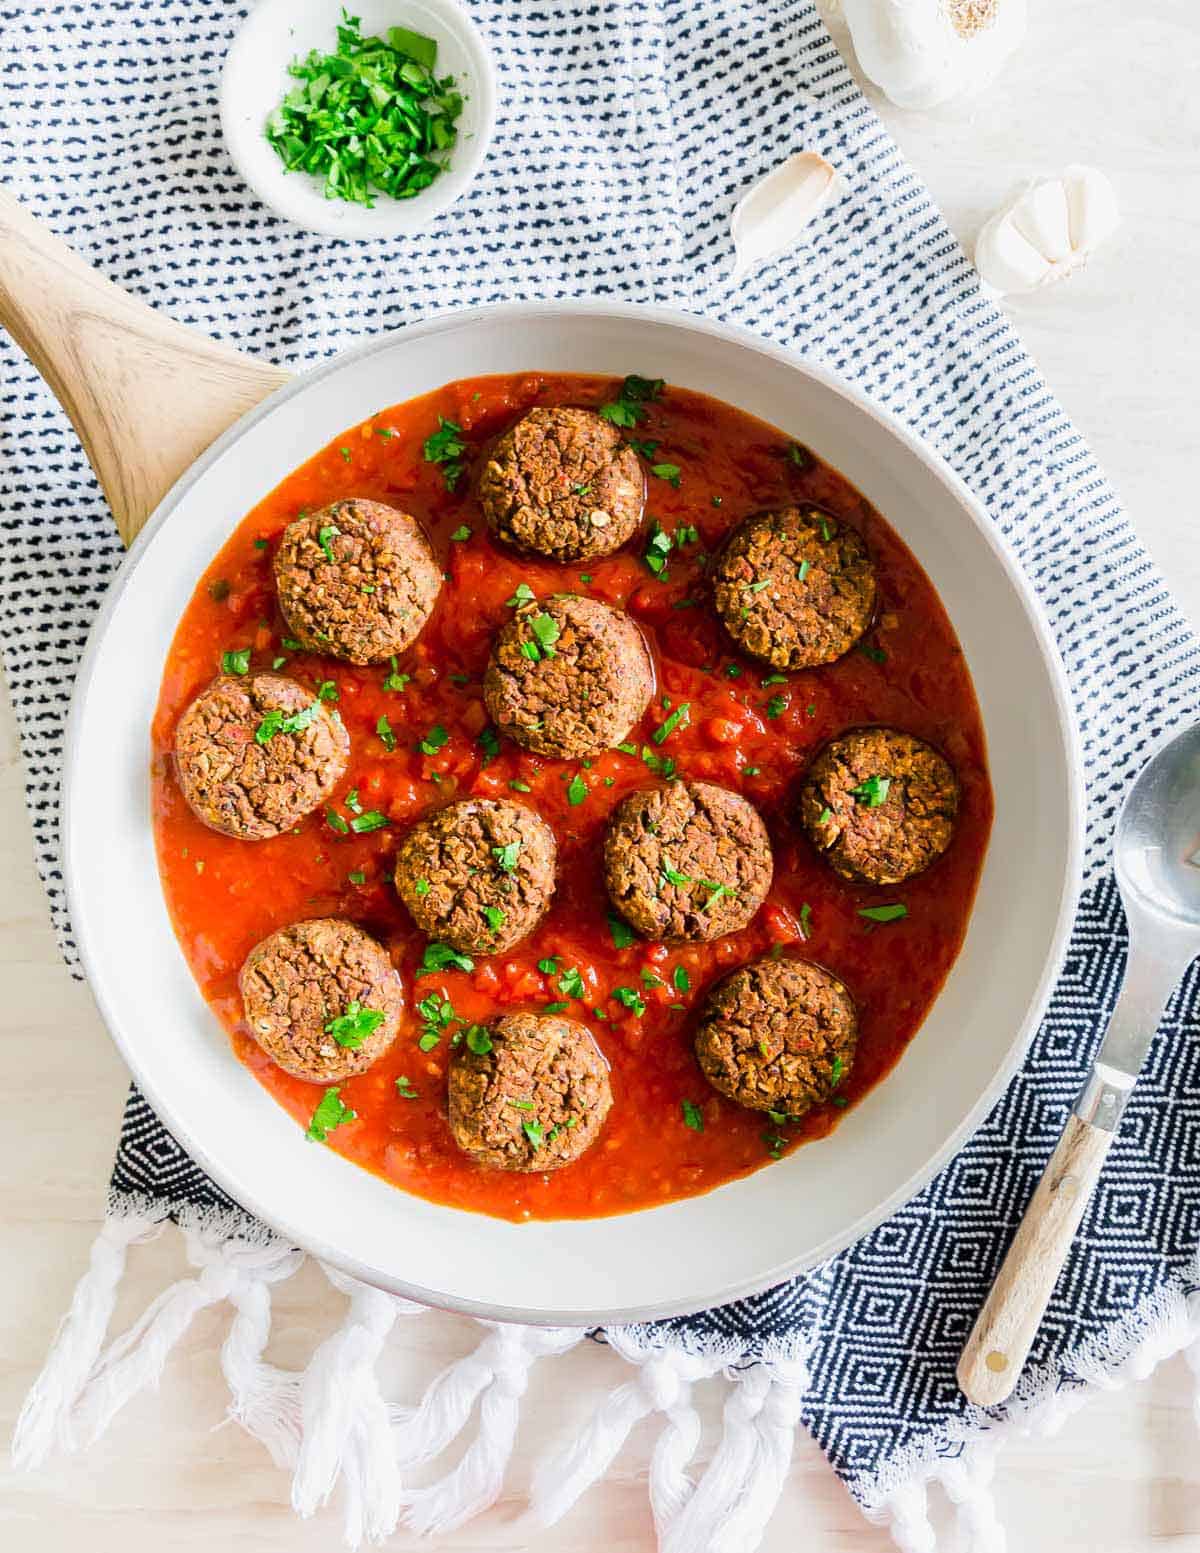 An easy bean meatball recipe using black beans and Italian spices. Vegan and gluten-free!